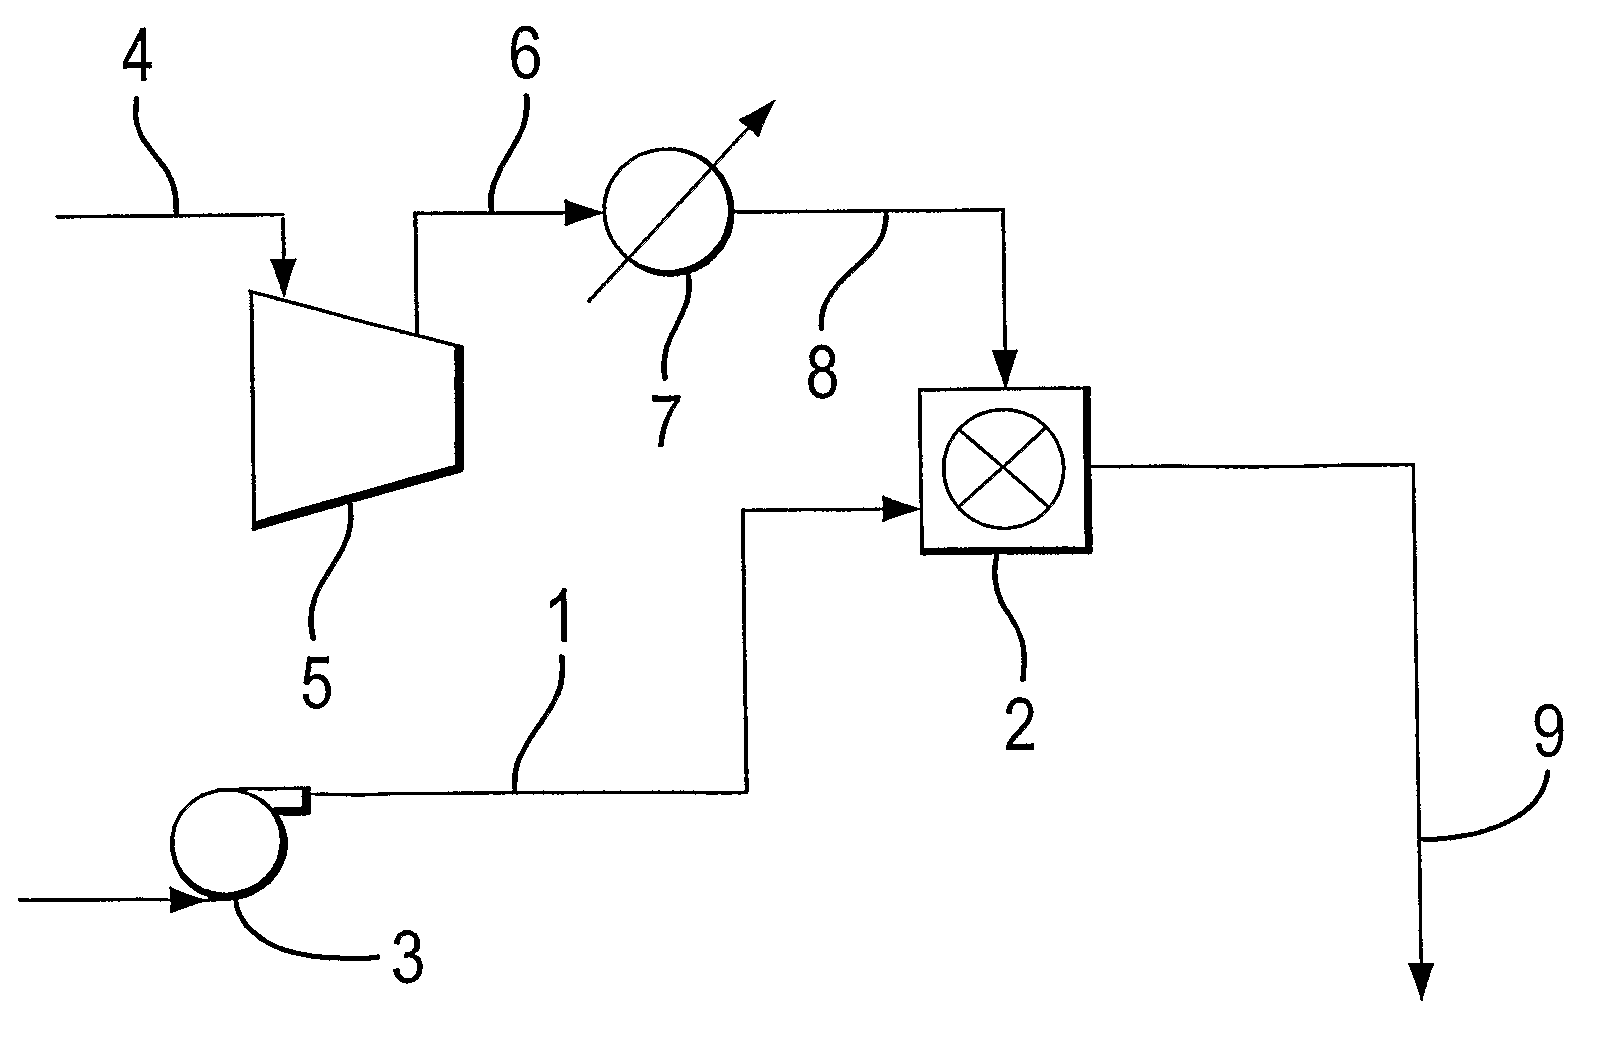 Method of injecting carbon dioxide